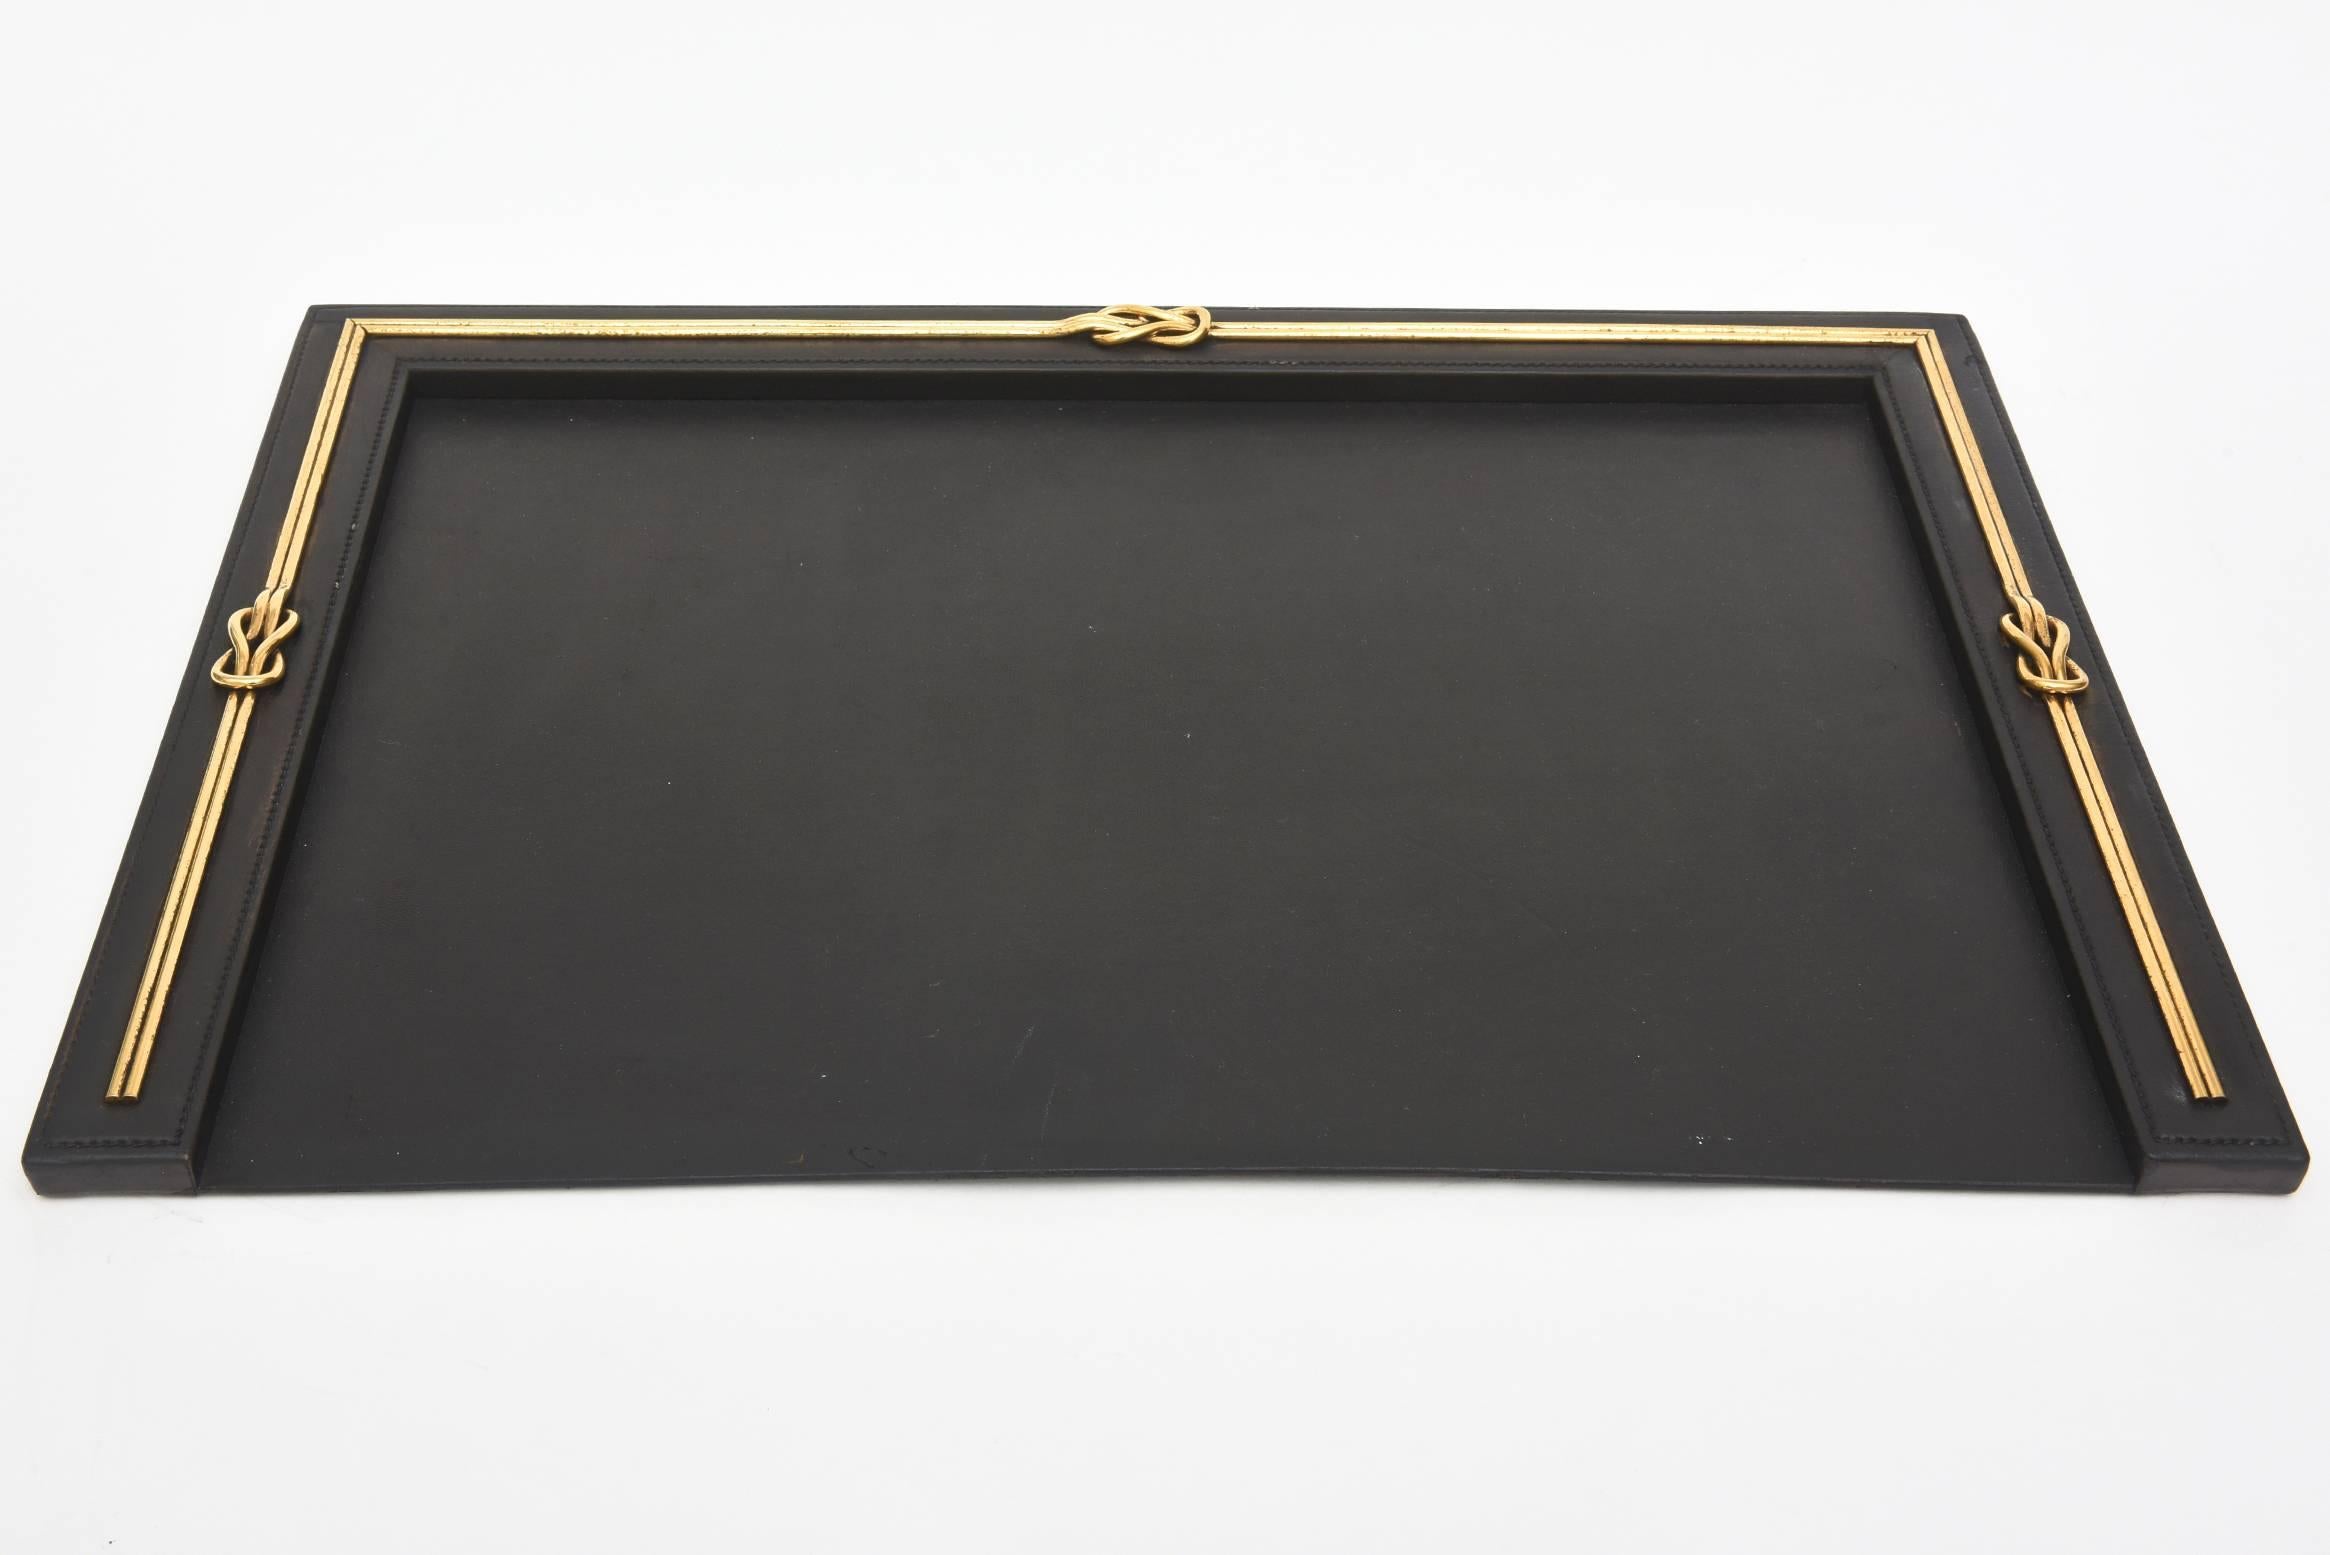 Black leather meets Gucci logo in thick heavy brass in this handsome vintage desk blotter, note tray holder and pencil or pen holder.
Sold as a set only. What a beautiful way to dress your desk. Perfect for a man or woman.
It is signed 